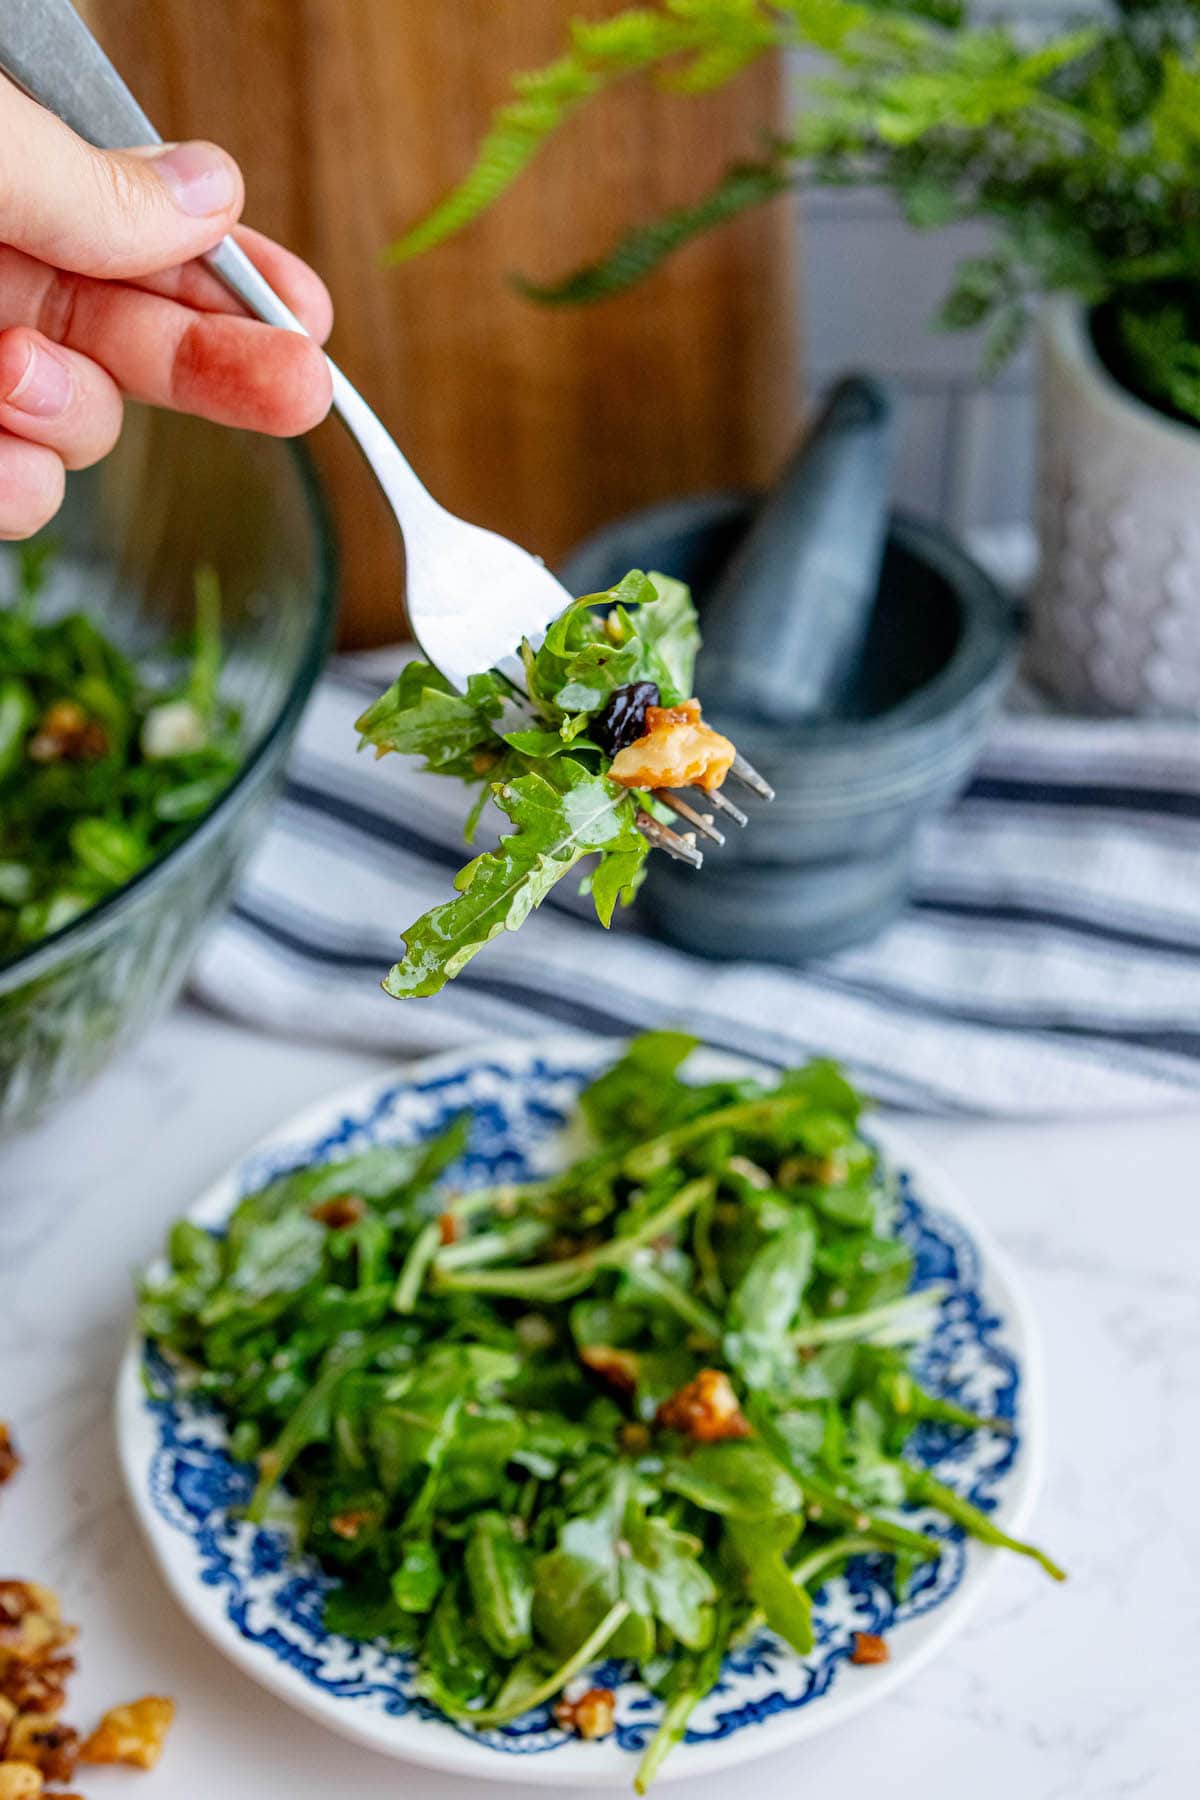 A person is holding a fork over a plate of Arugula Salad.